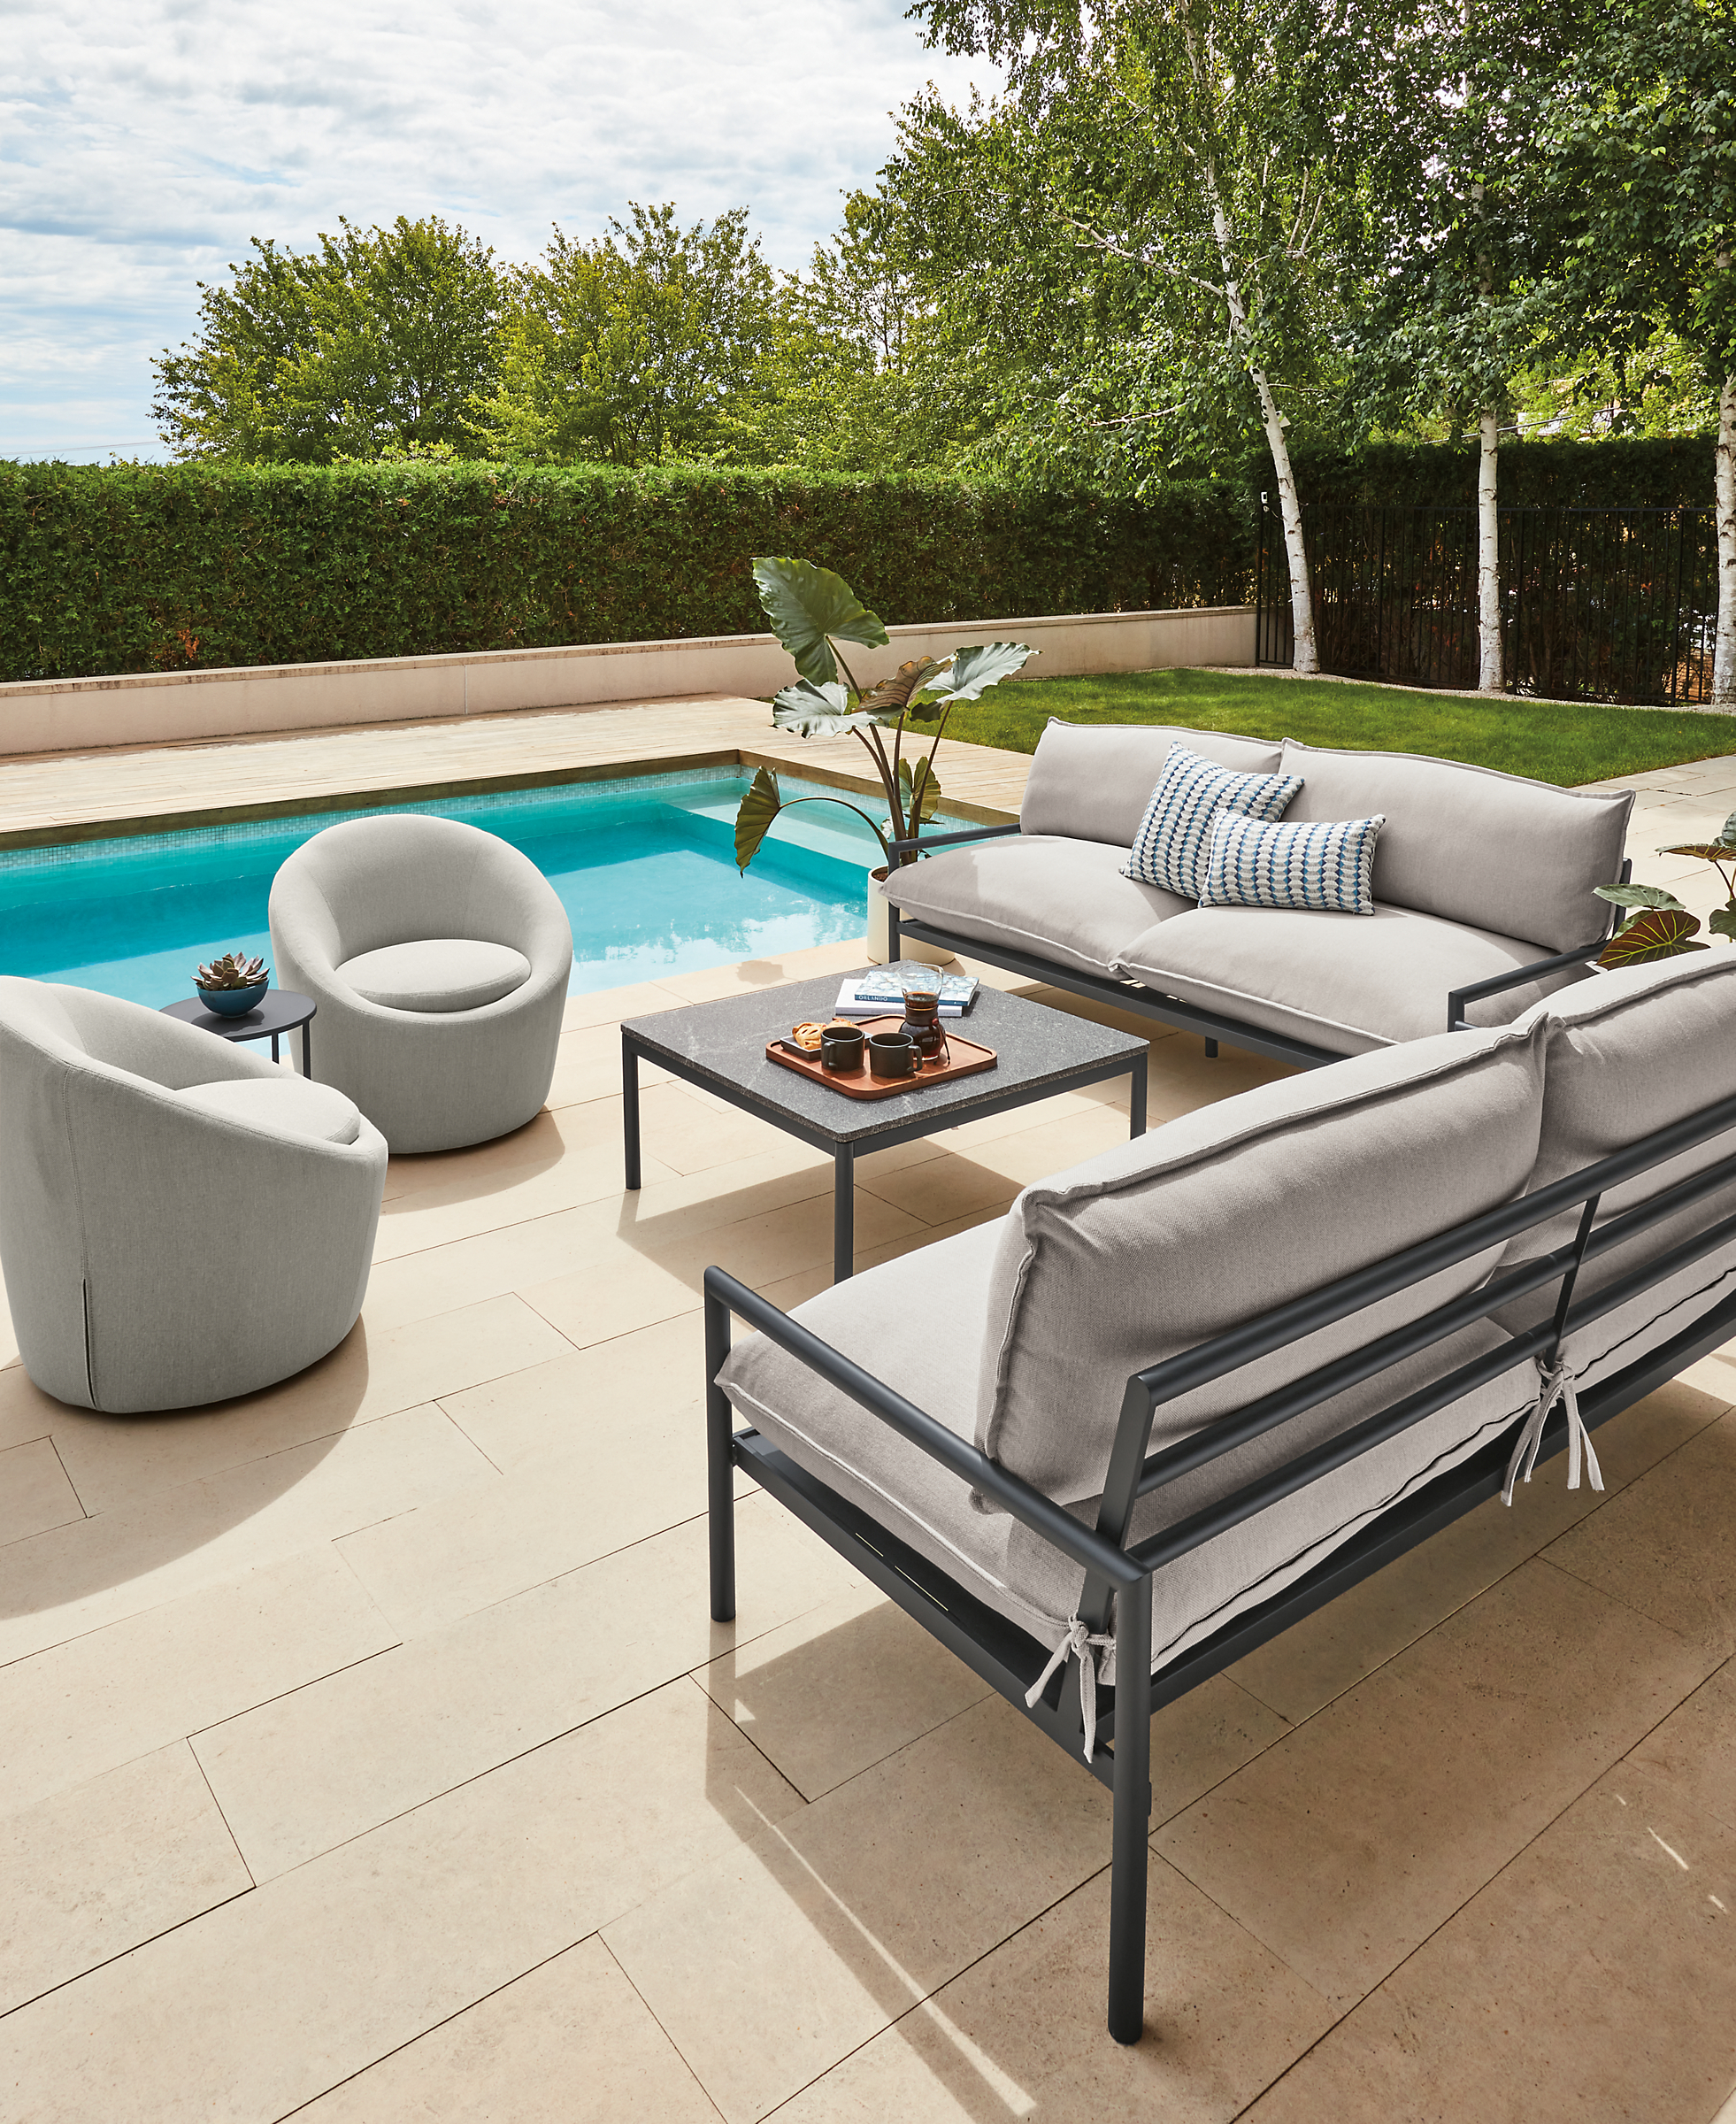 Two Westbrook outdoor sofas in graphite with Mist grey cushions, two Crest swivel chairs and Westbrook coffee table with Elegant grey granite top.